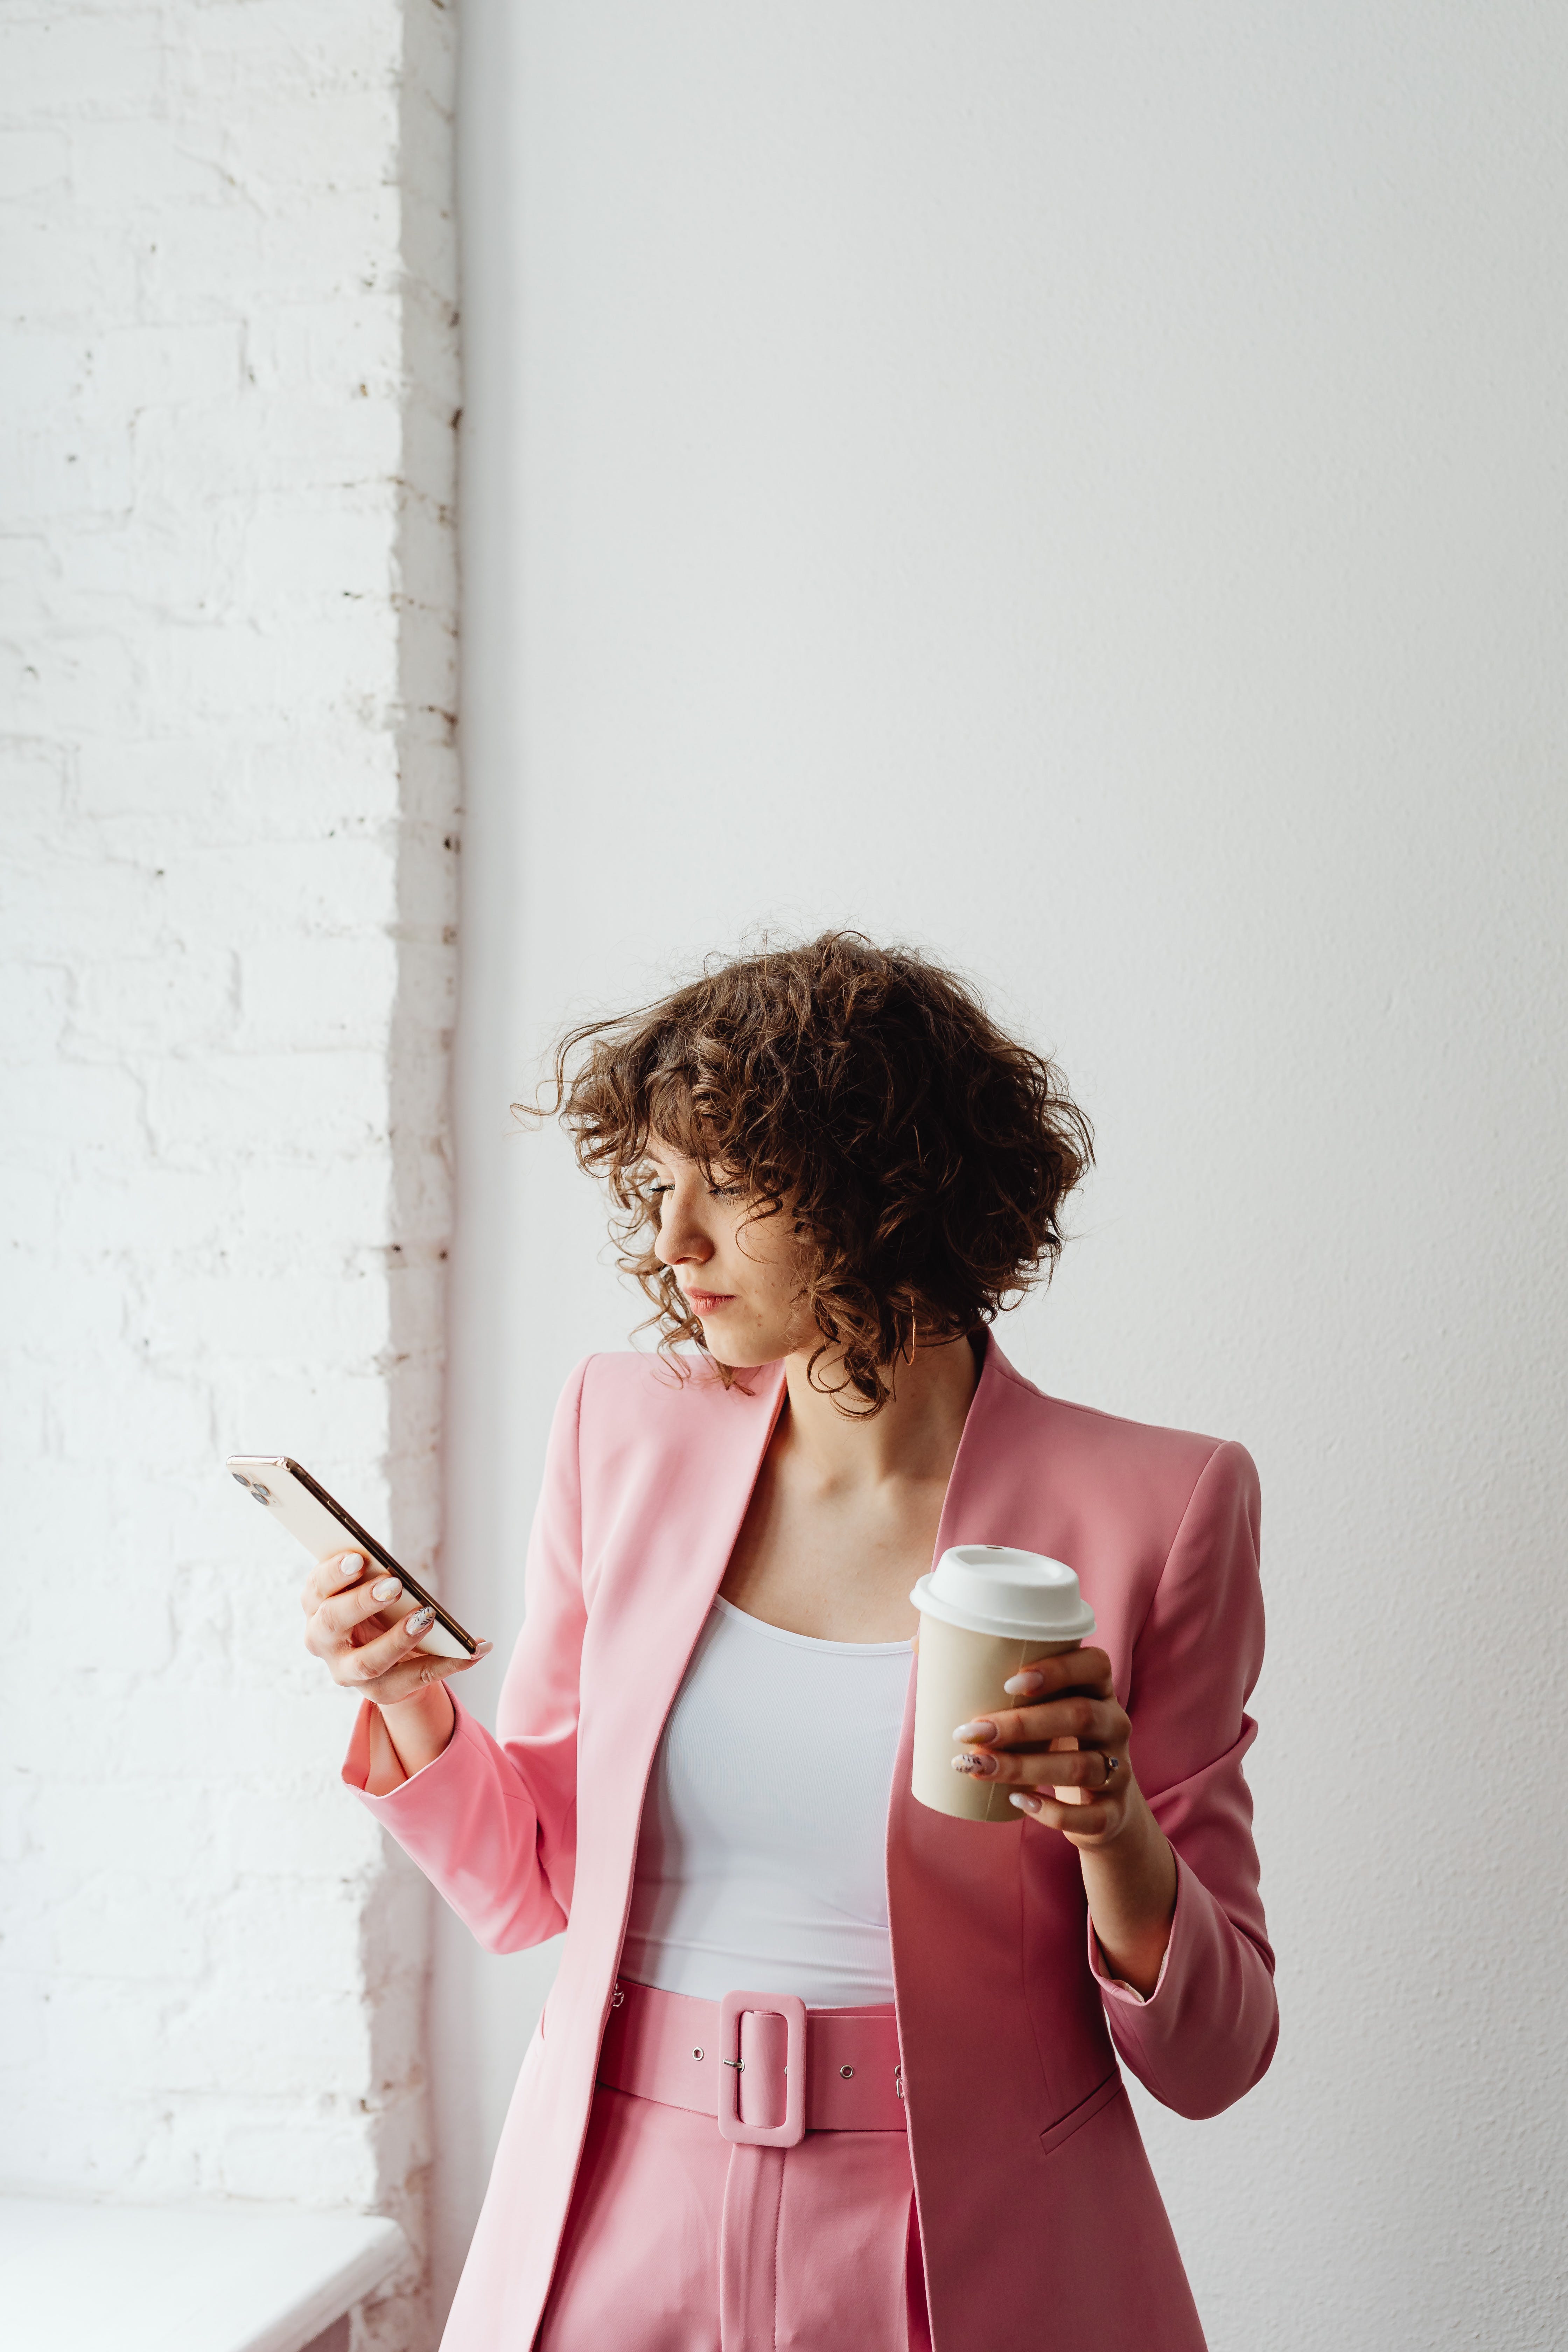 A woman holding a beverage while texting on her phone | Source: Pexels